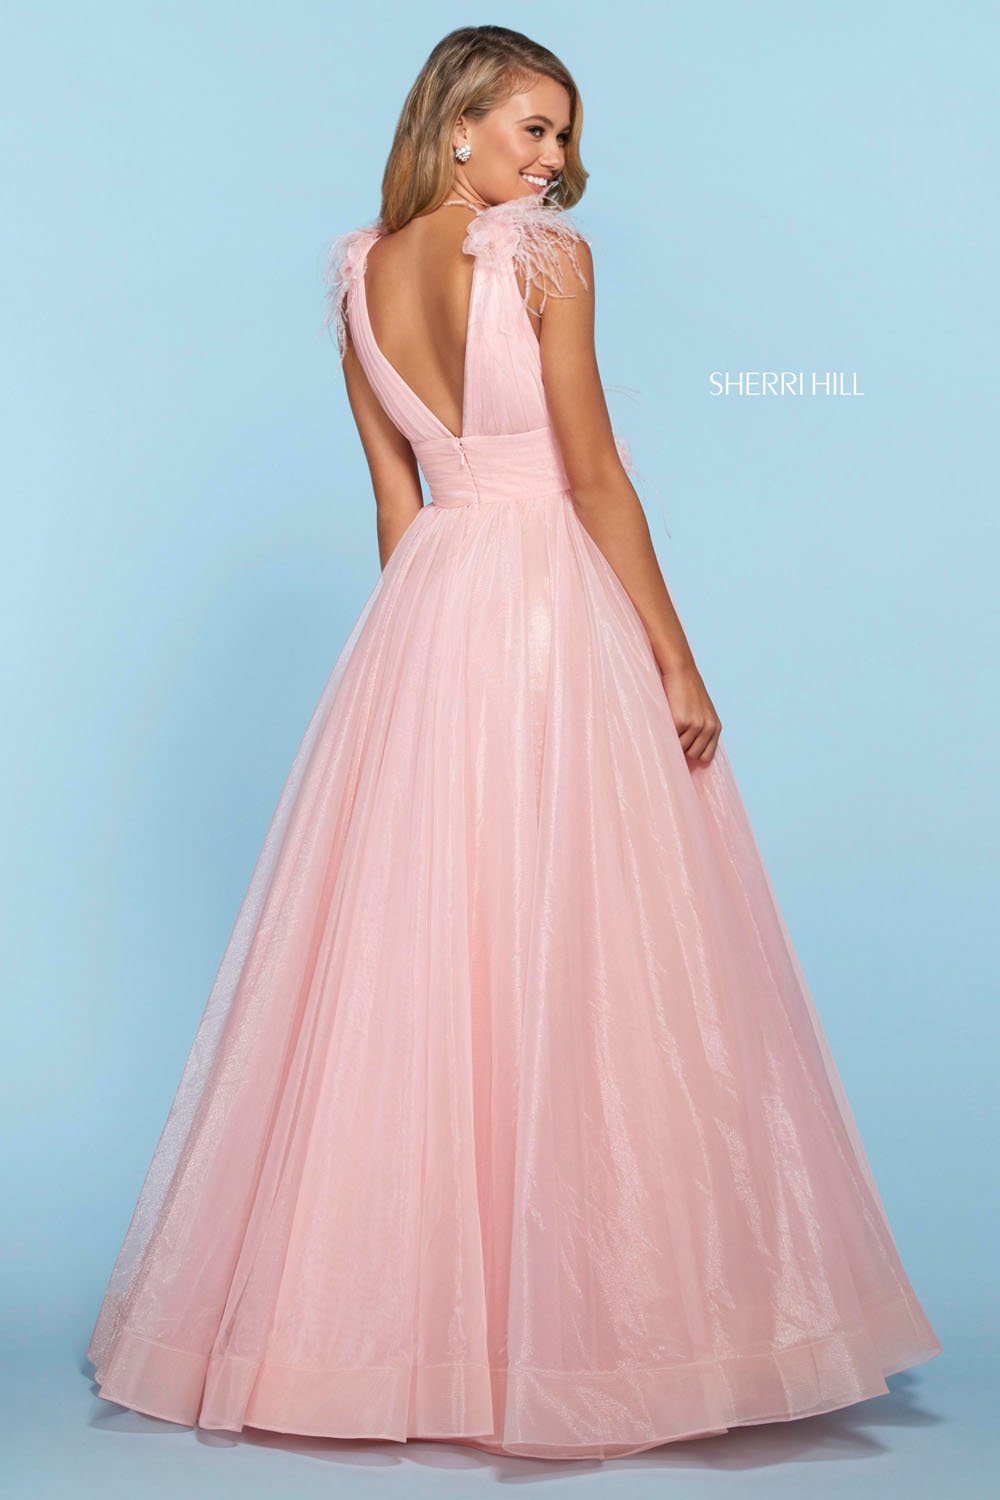 Sherri Hill 53416 dress images in these colors: Ivory, Light Blue, Black, Lilac, Yellow, Pink.